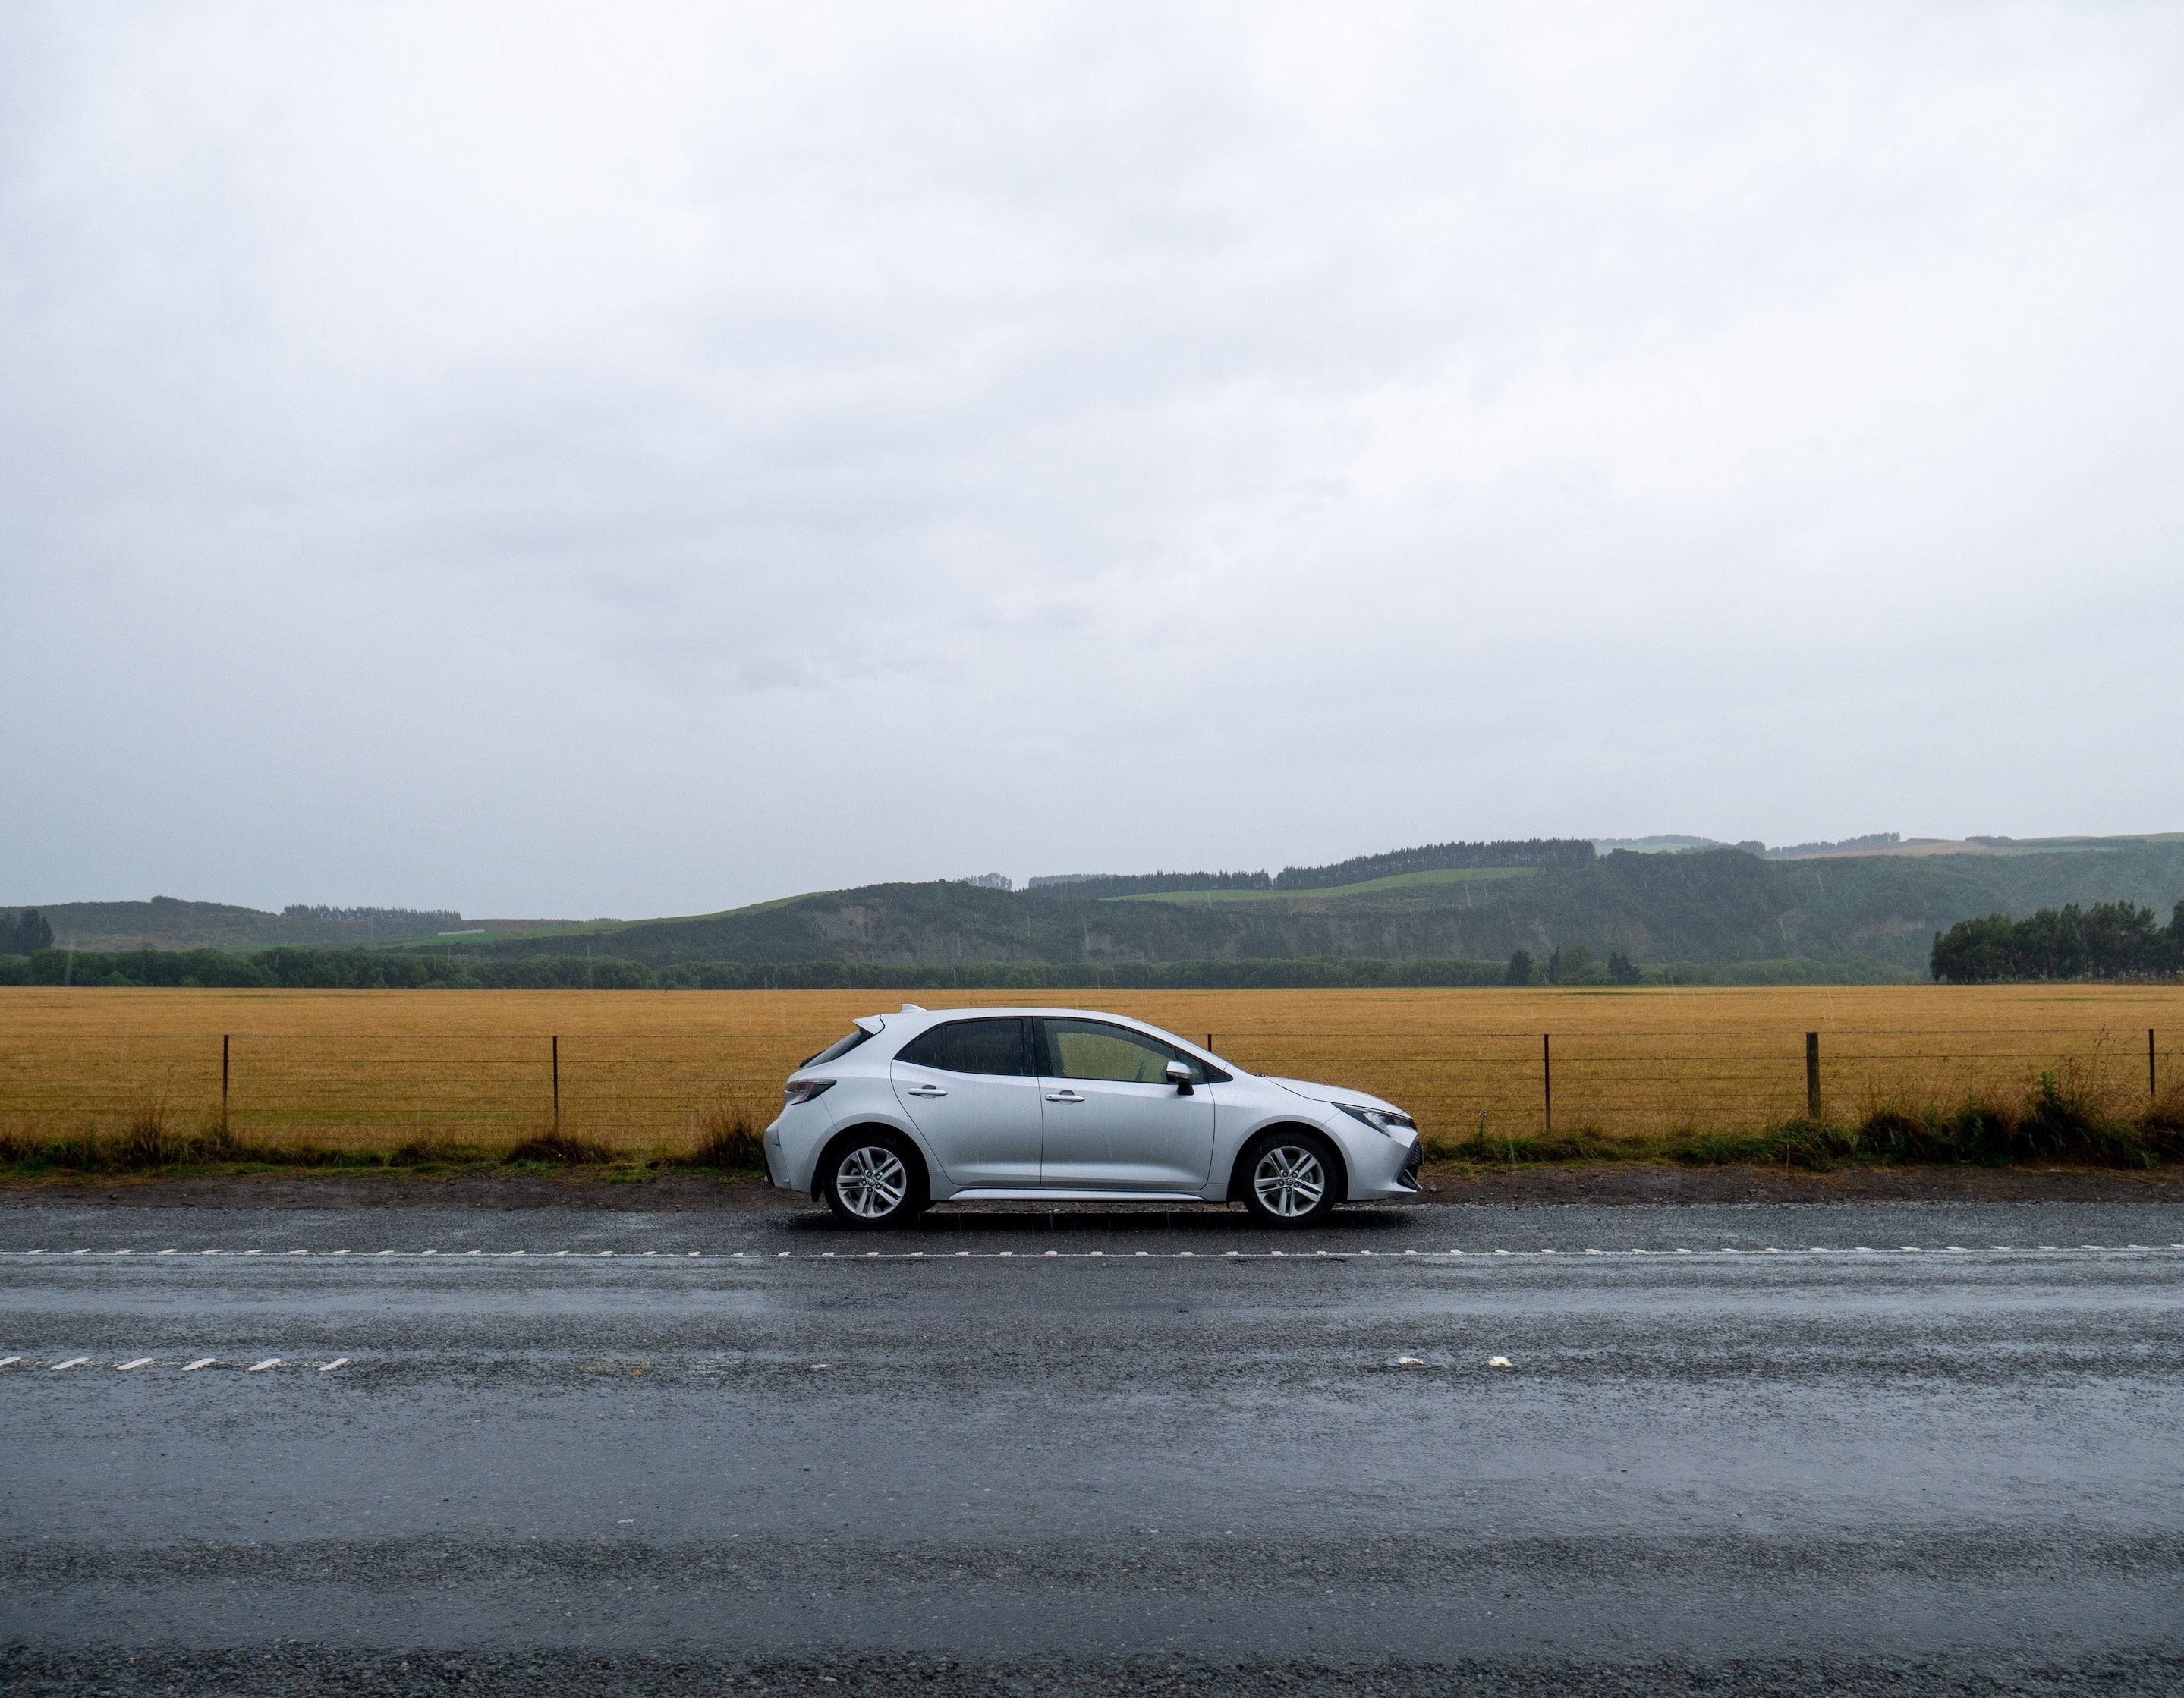 Lone silver hatchback on a country road, with hills in the background